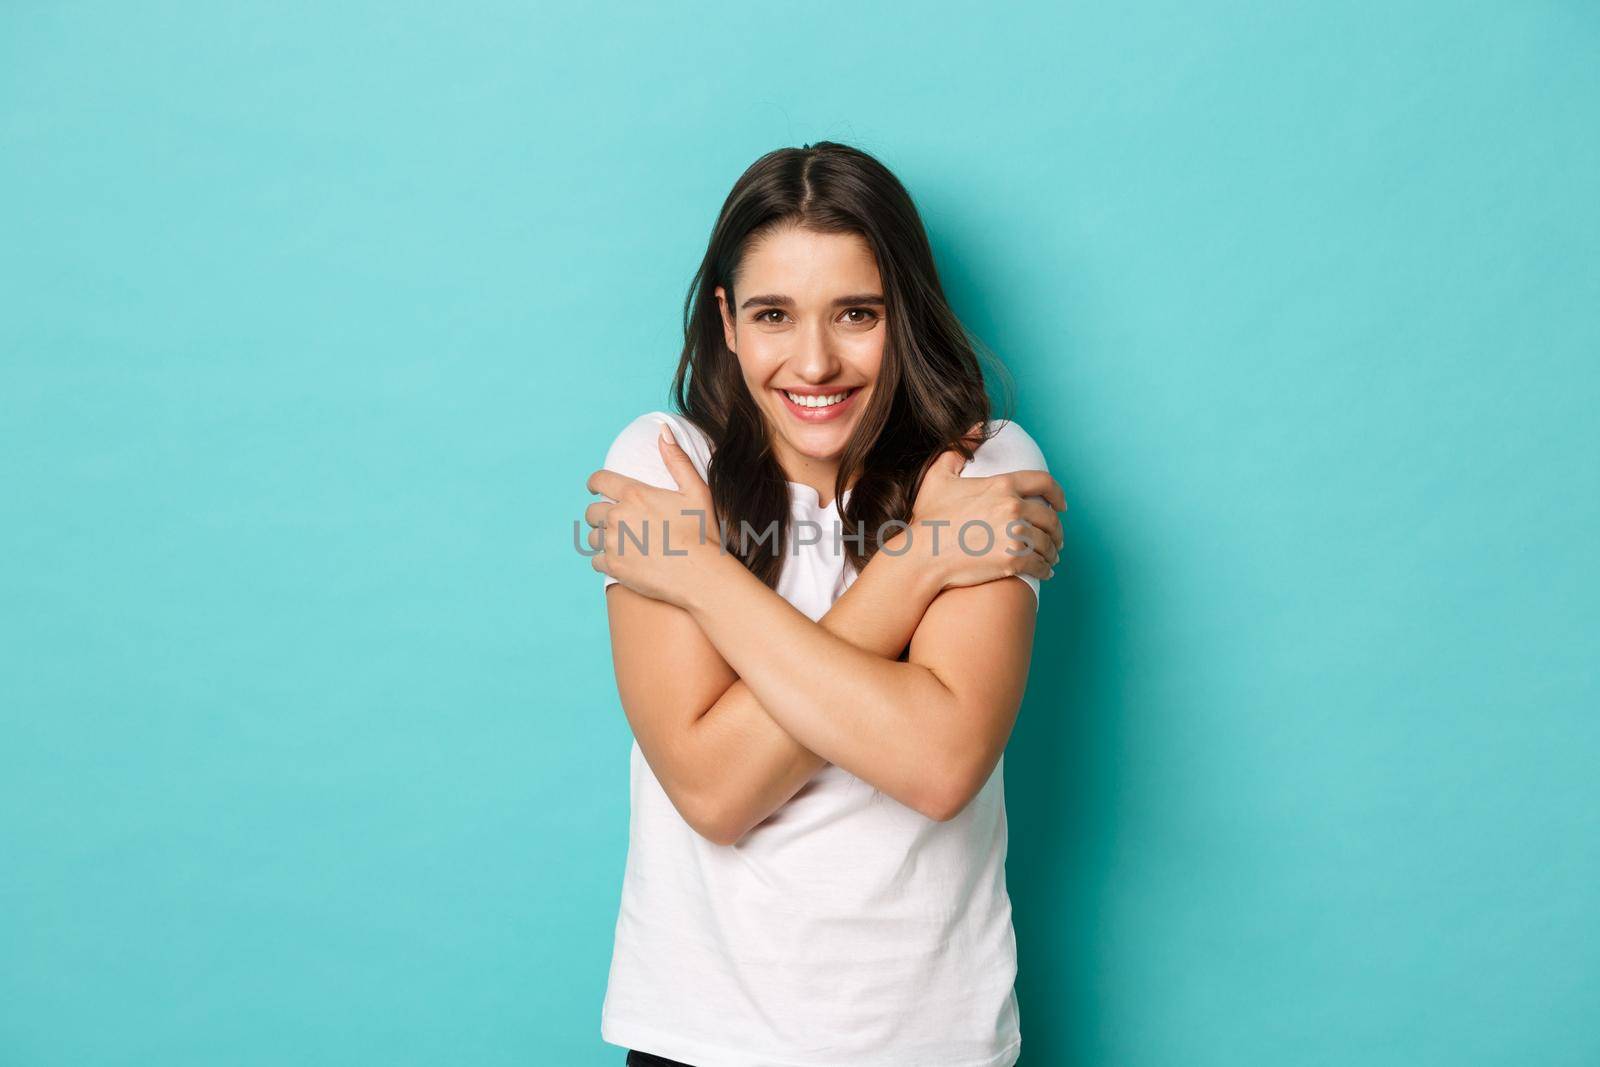 Image of cute smiling girl in white t-shirt, embracing herself, feeling chilly, standing over blue background.